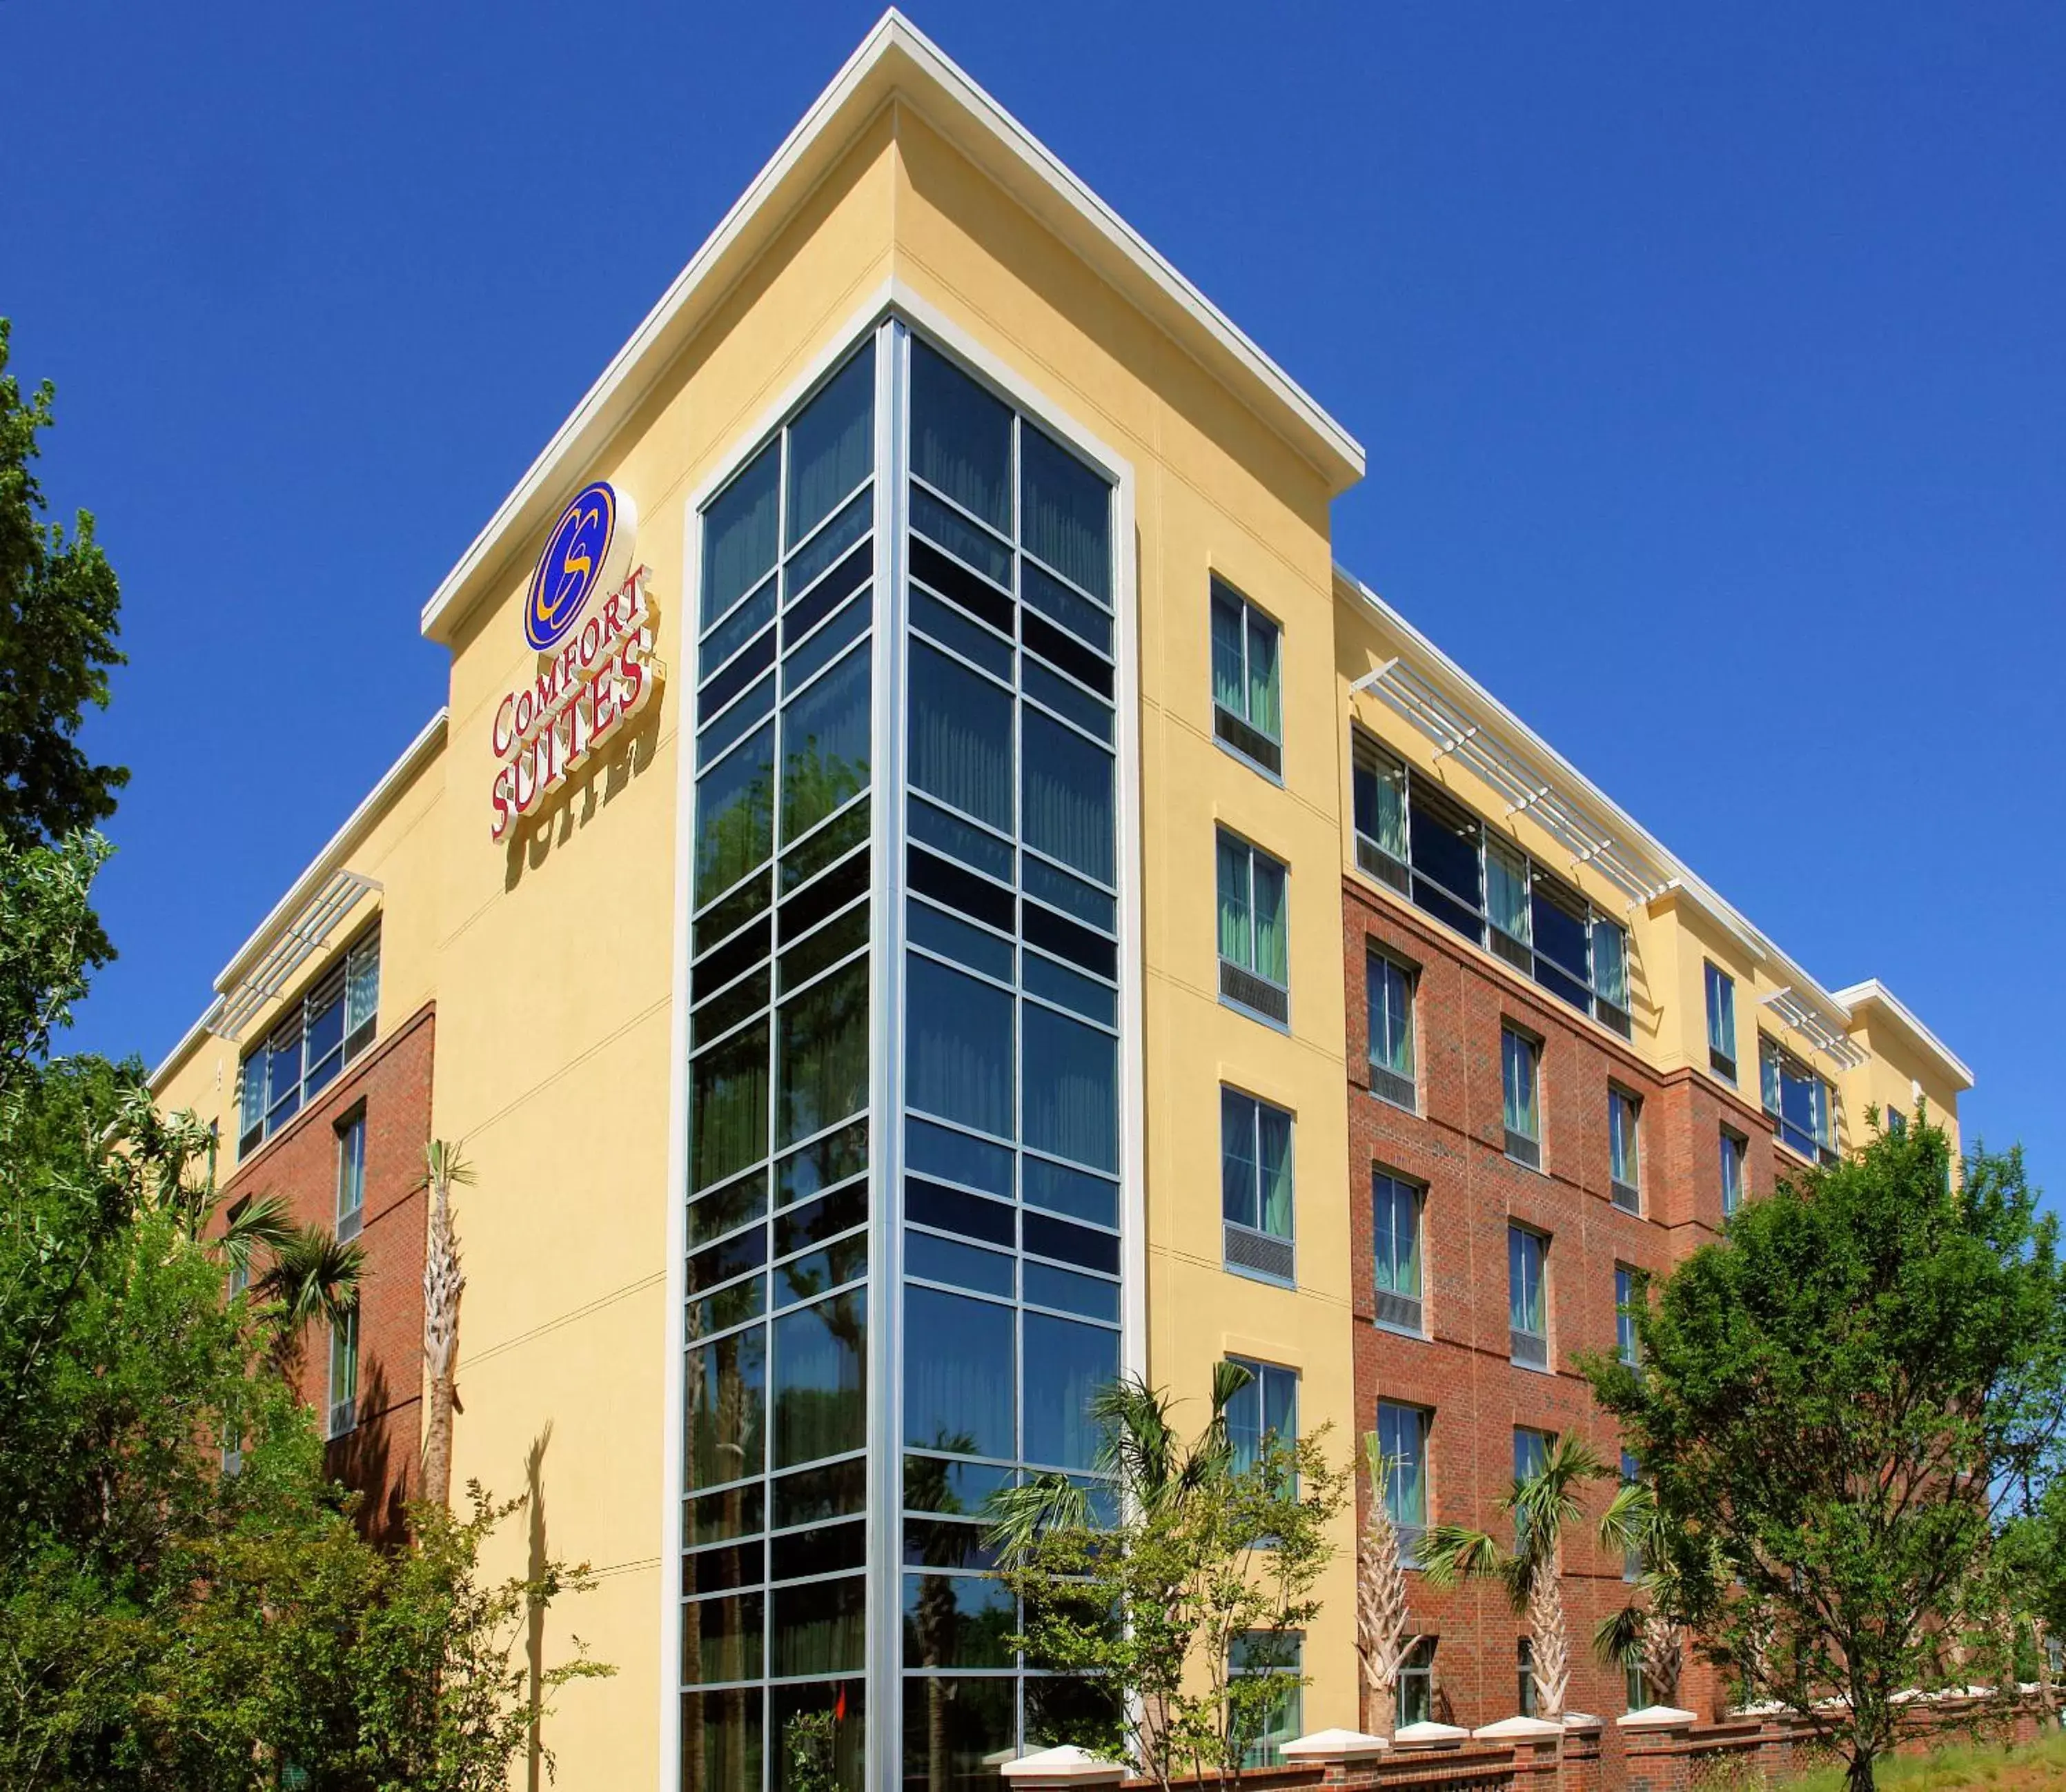 Property building in Comfort Suites Charleston West Ashley